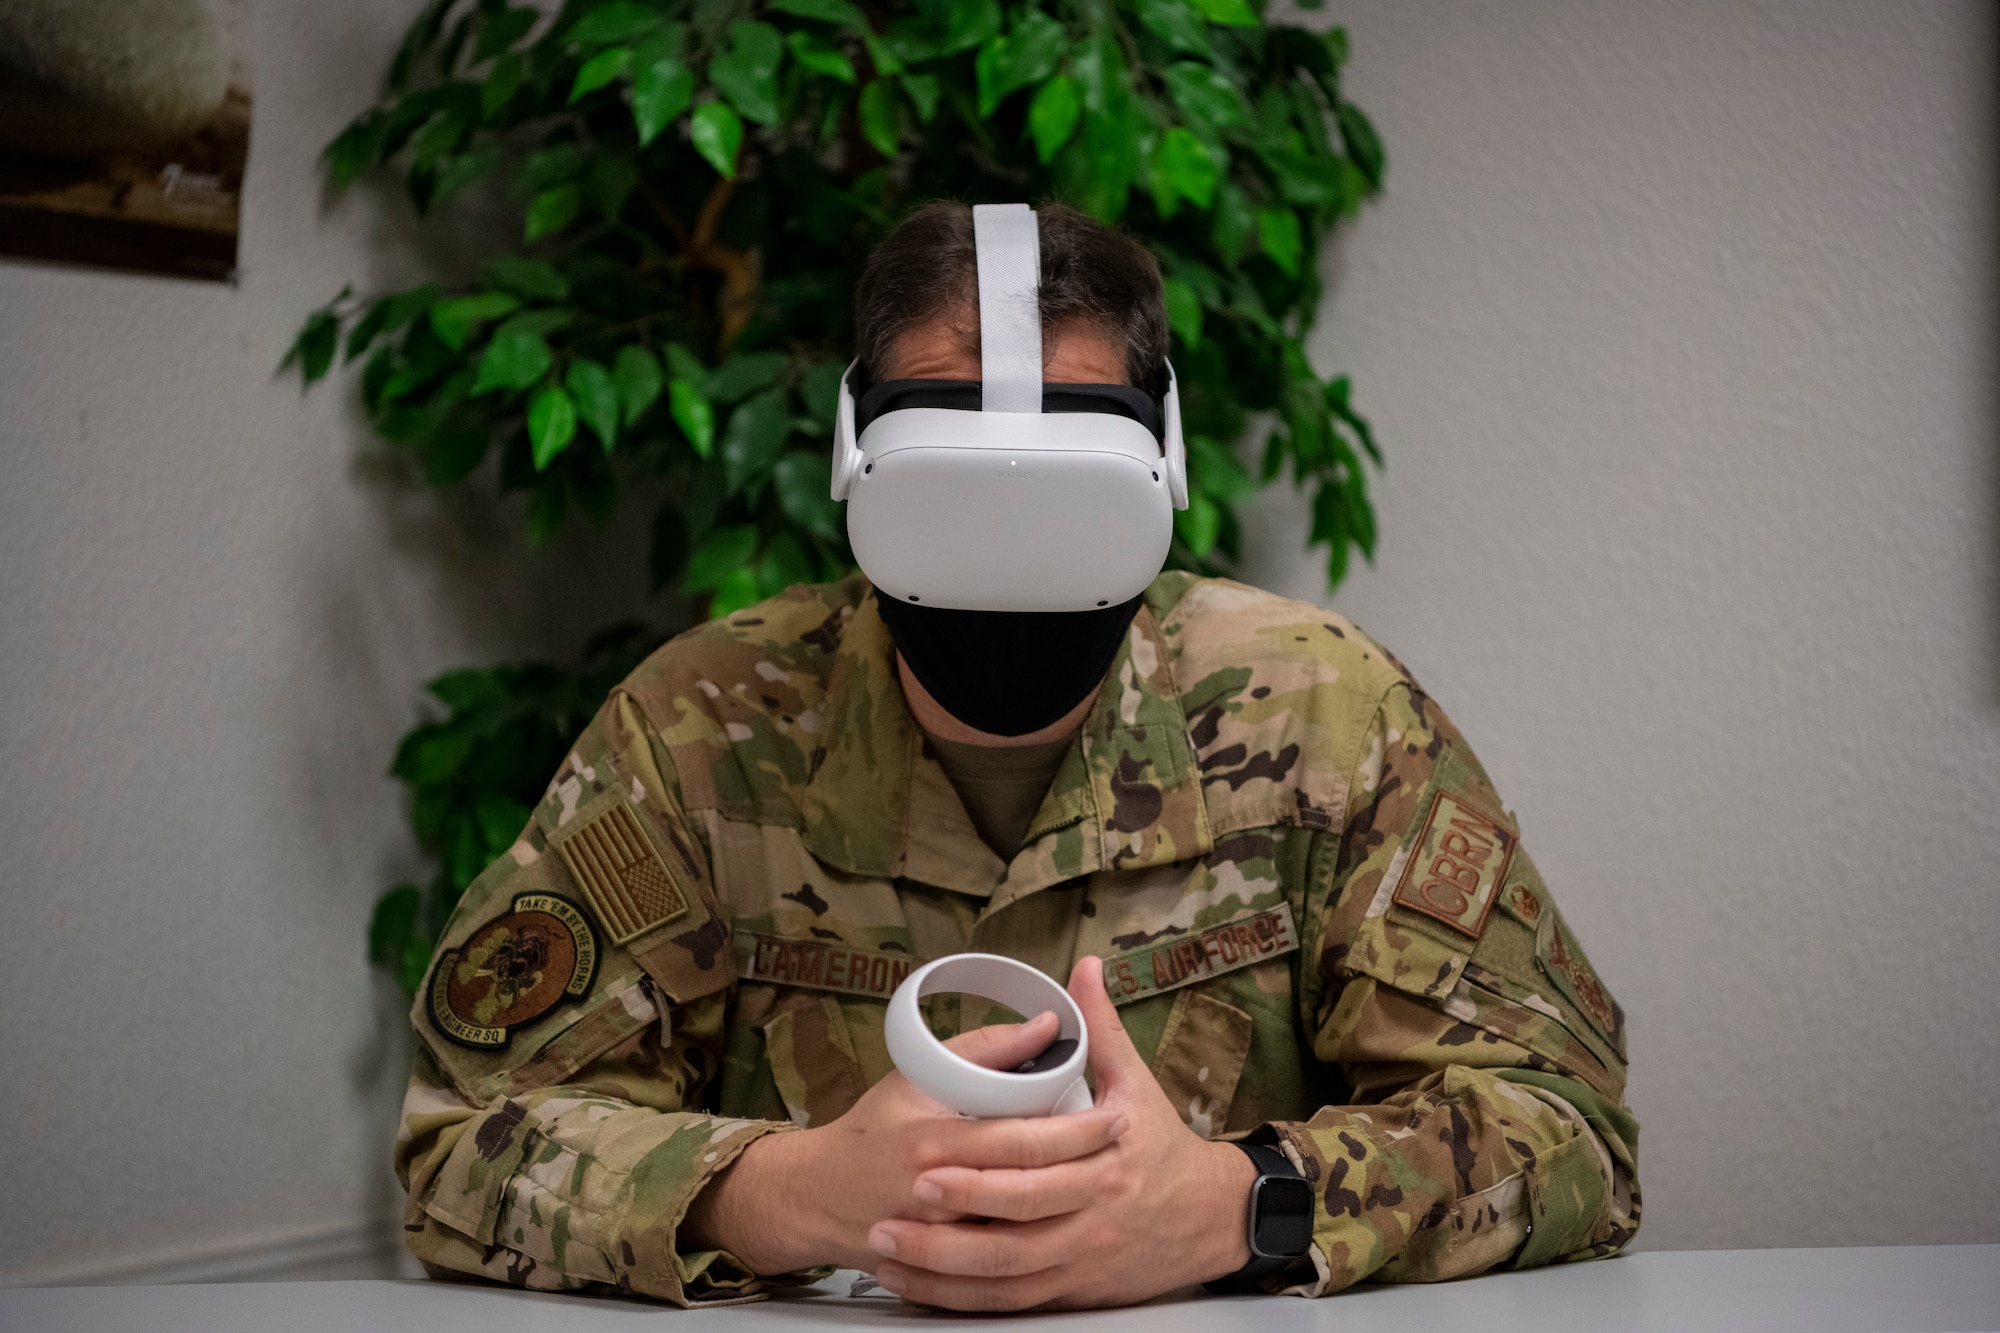 A man in uniform sits at a table weating a virtual reality headset while holding a virtual reality controller.